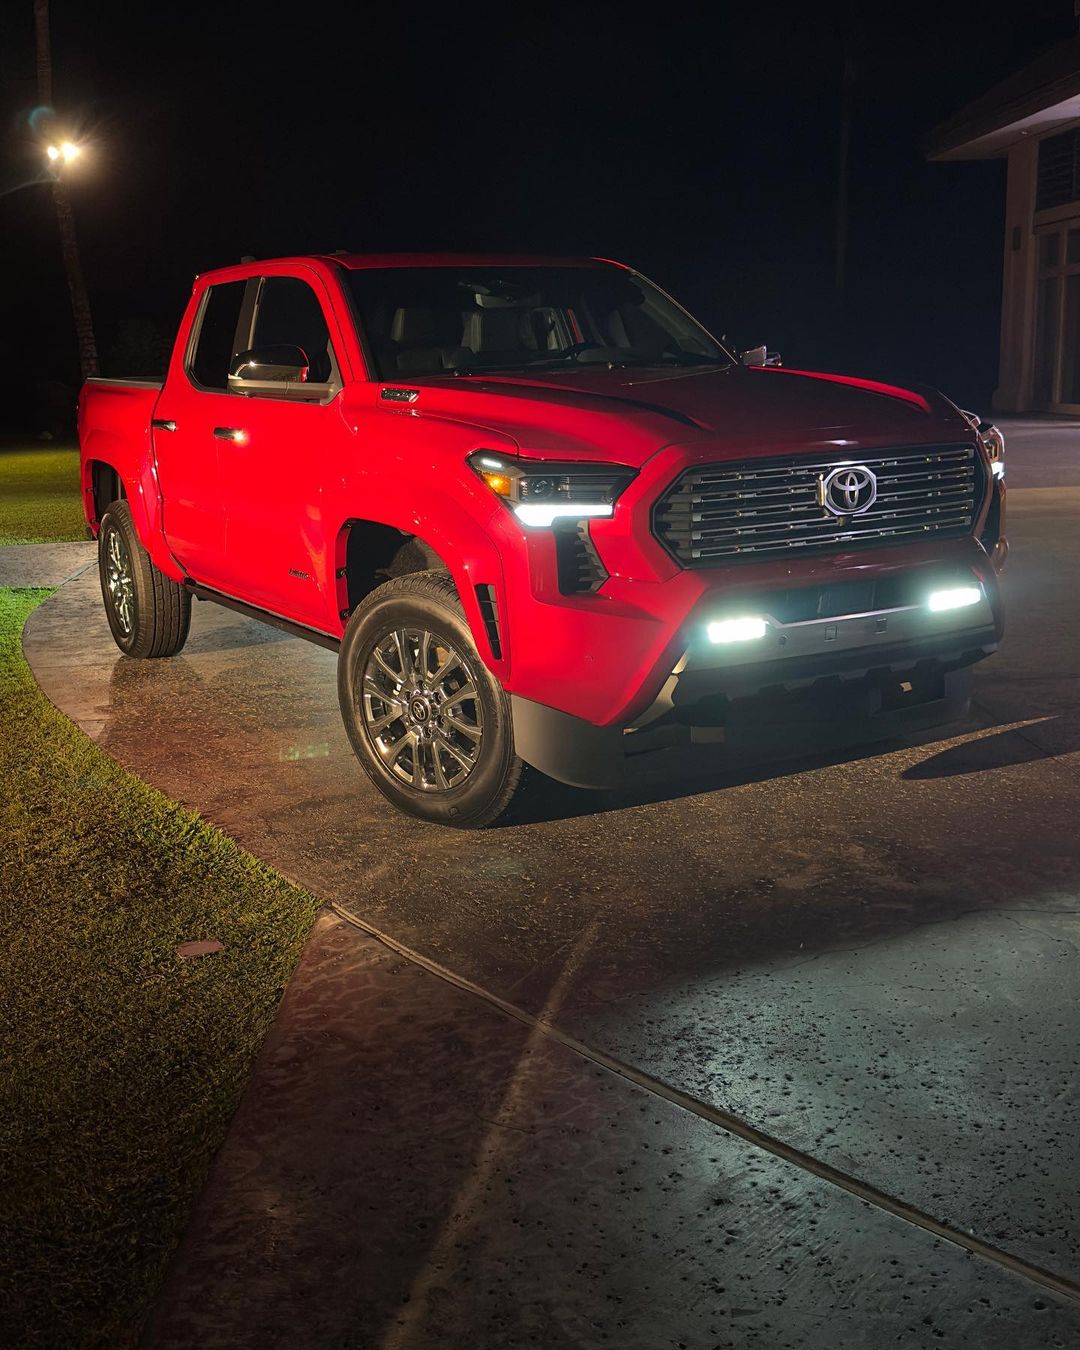 2024 Tacoma 2024 Tacoma Limited Specs, Price, MPG, Options/Packages, Features, Photos & Videos 47504198_268084068949830_6012863920283177996_n-